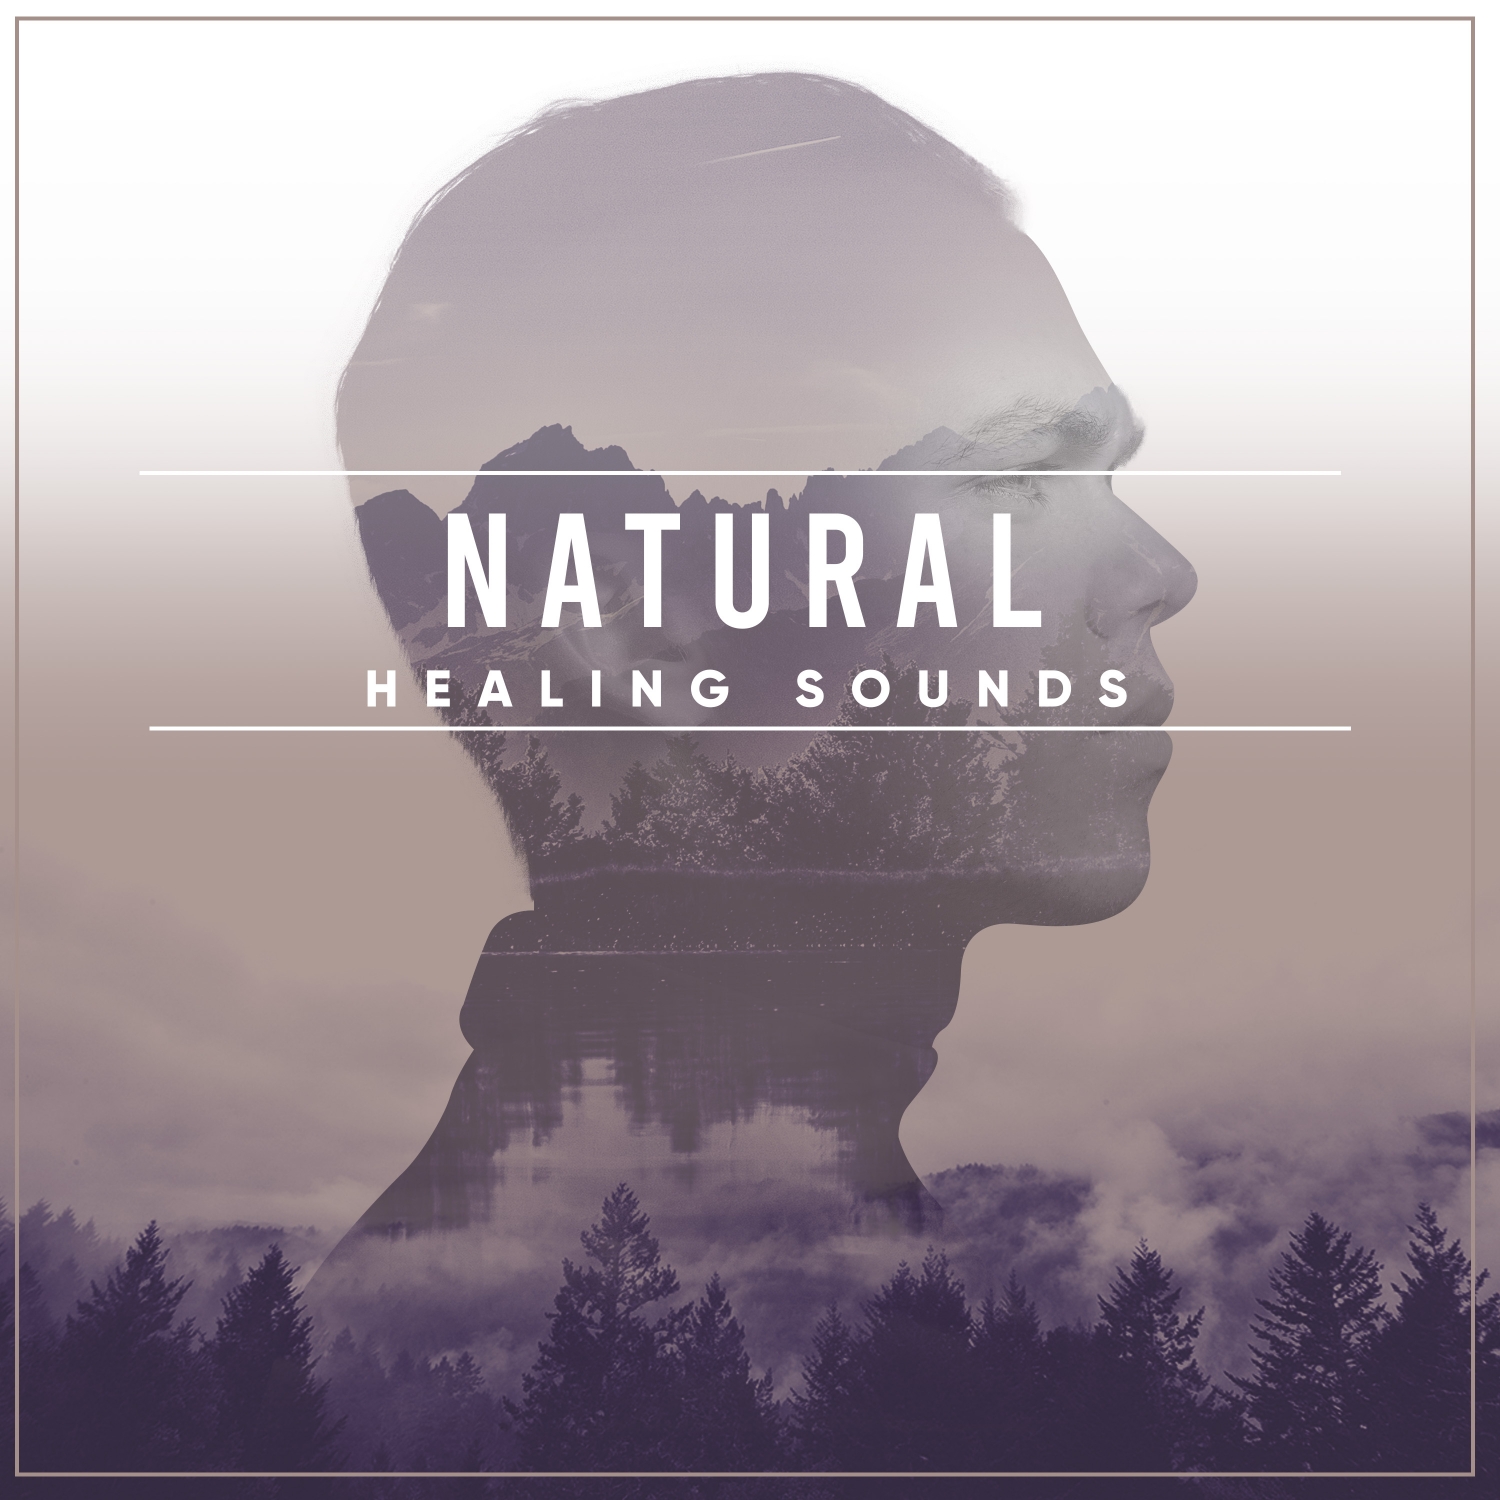 19 Natural Healing Songs to Invigorate Body and Soul